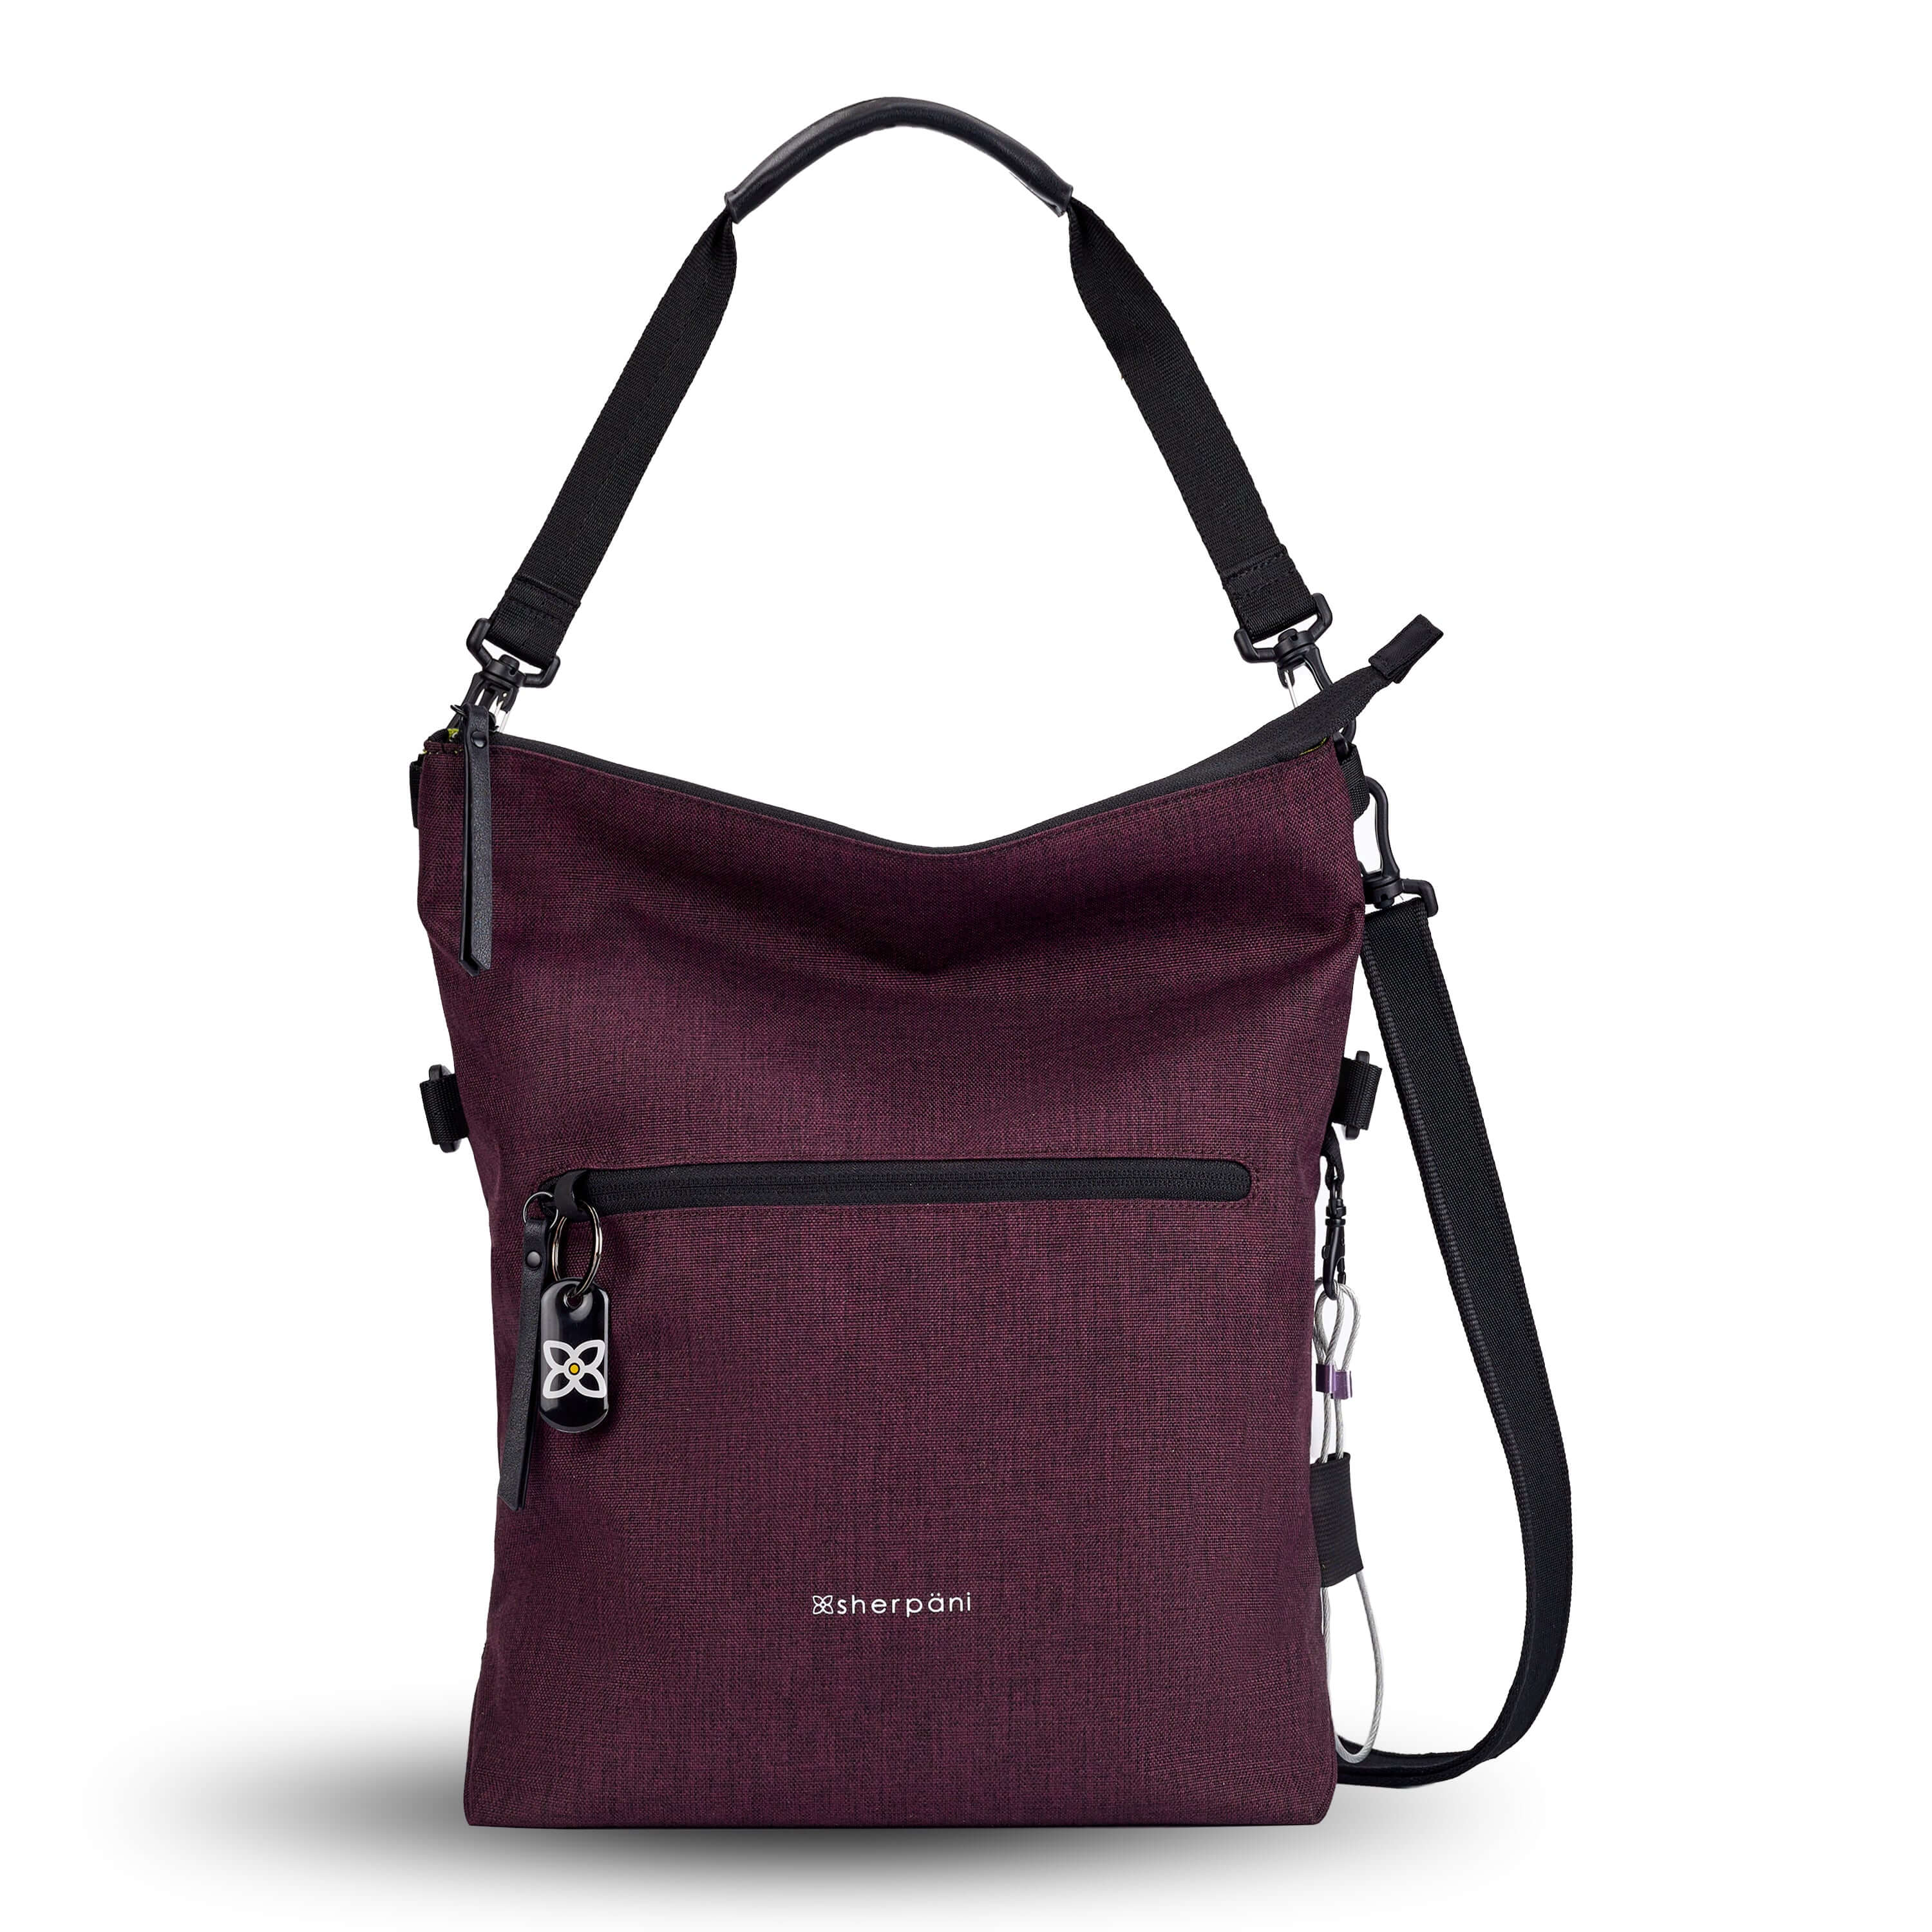 Flat front view of Sherpani&#39;s Anti-Theft bag, the Vale AT in Merlot with vegan leather accents in black. The bag is standing tall with a detachable tote strap clipped to the top. There is an adjustable/detachable crossbody strap and a chair loop lock is clipped to the side of the bag. The front features an external compartment with a locking zipper and ReturnMe tag.